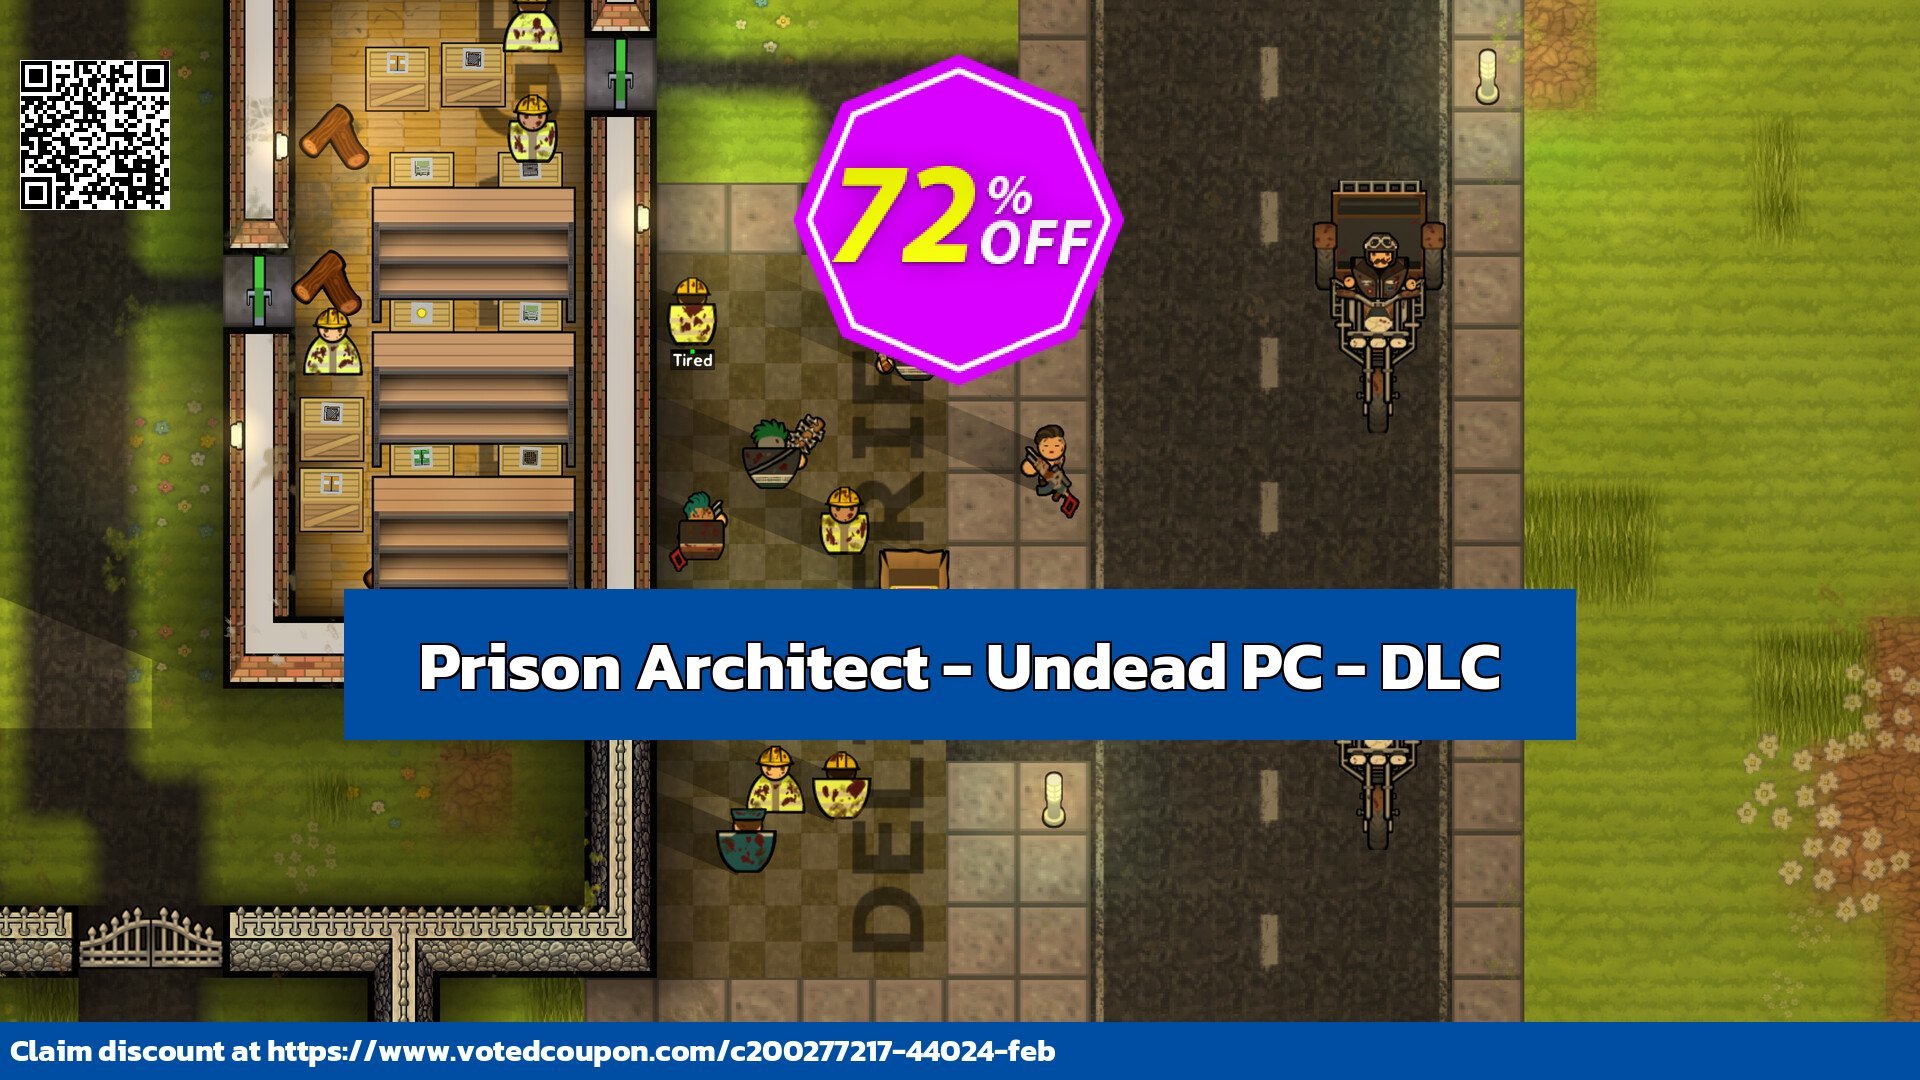 Prison Architect - Undead PC - DLC Coupon Code May 2024, 77% OFF - VotedCoupon